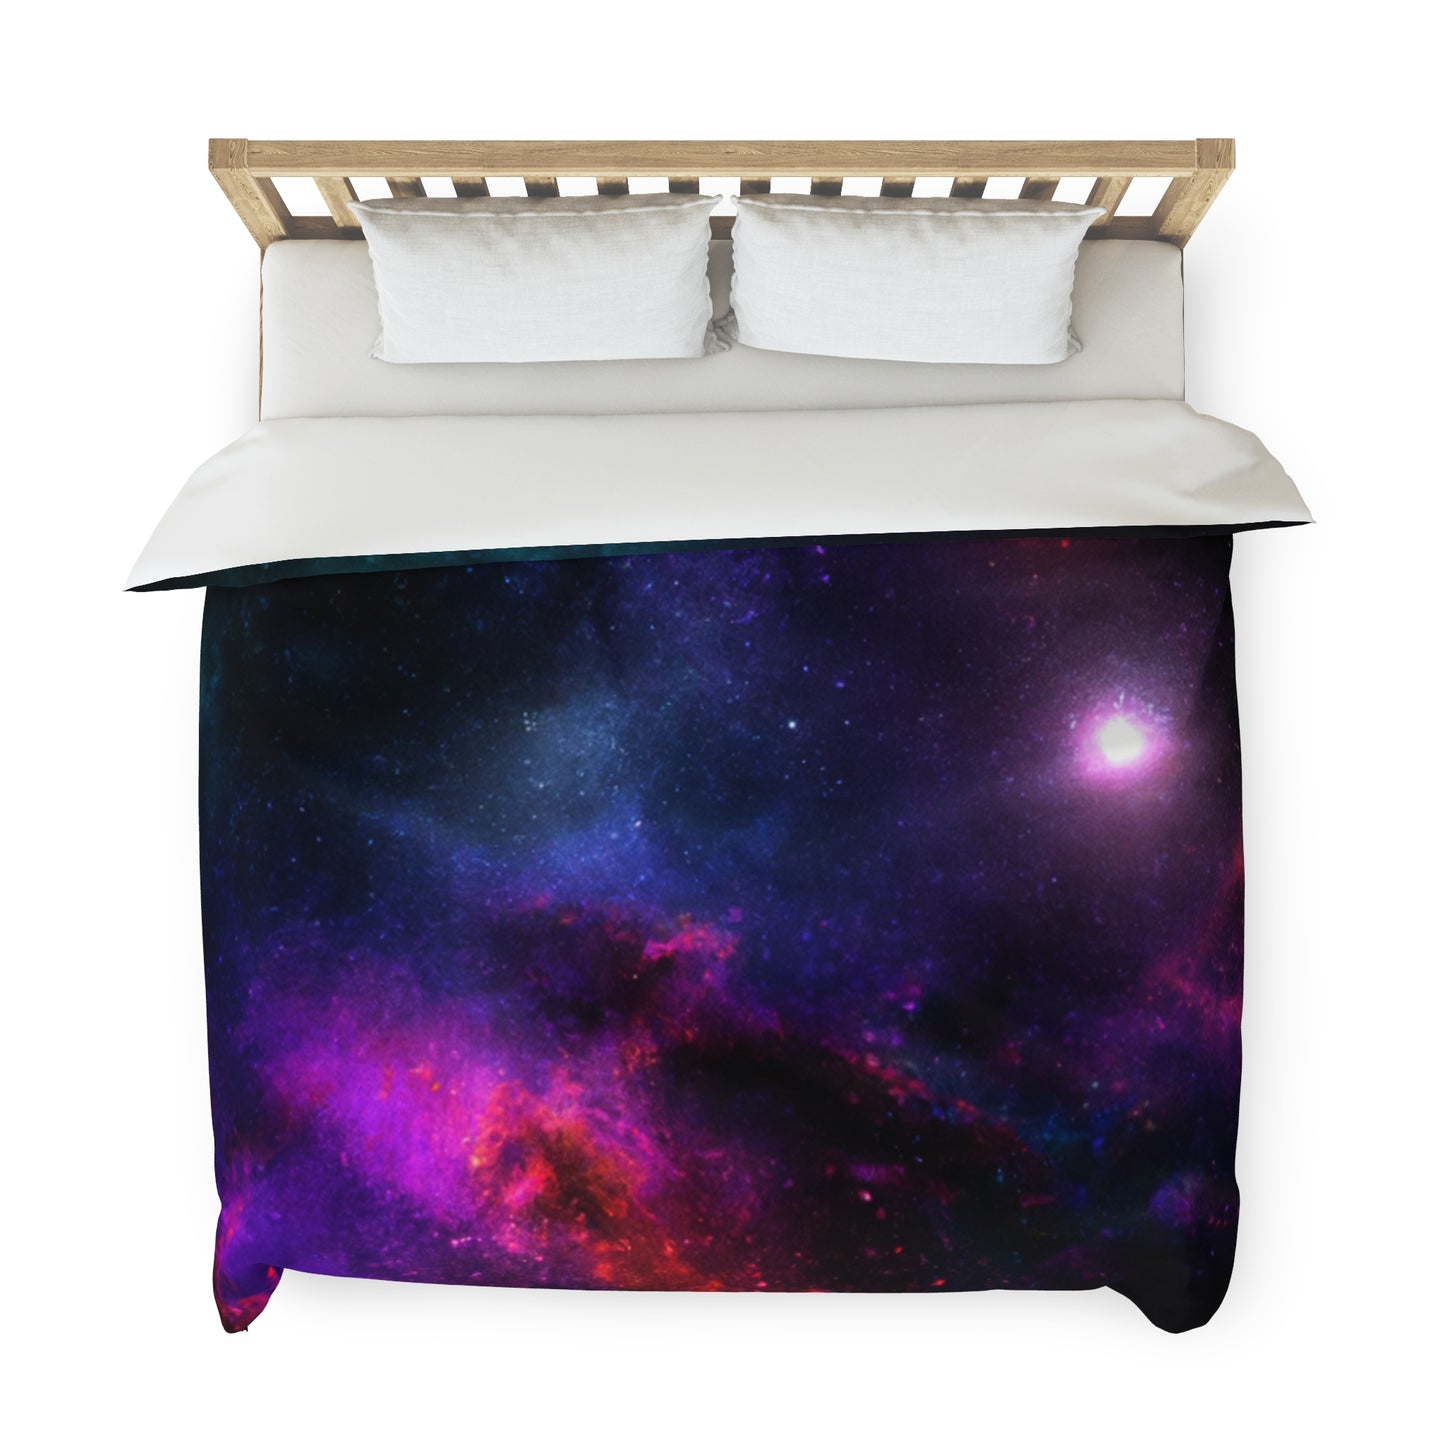 The Dream of Harmony - Astronomy Duvet Bed Cover